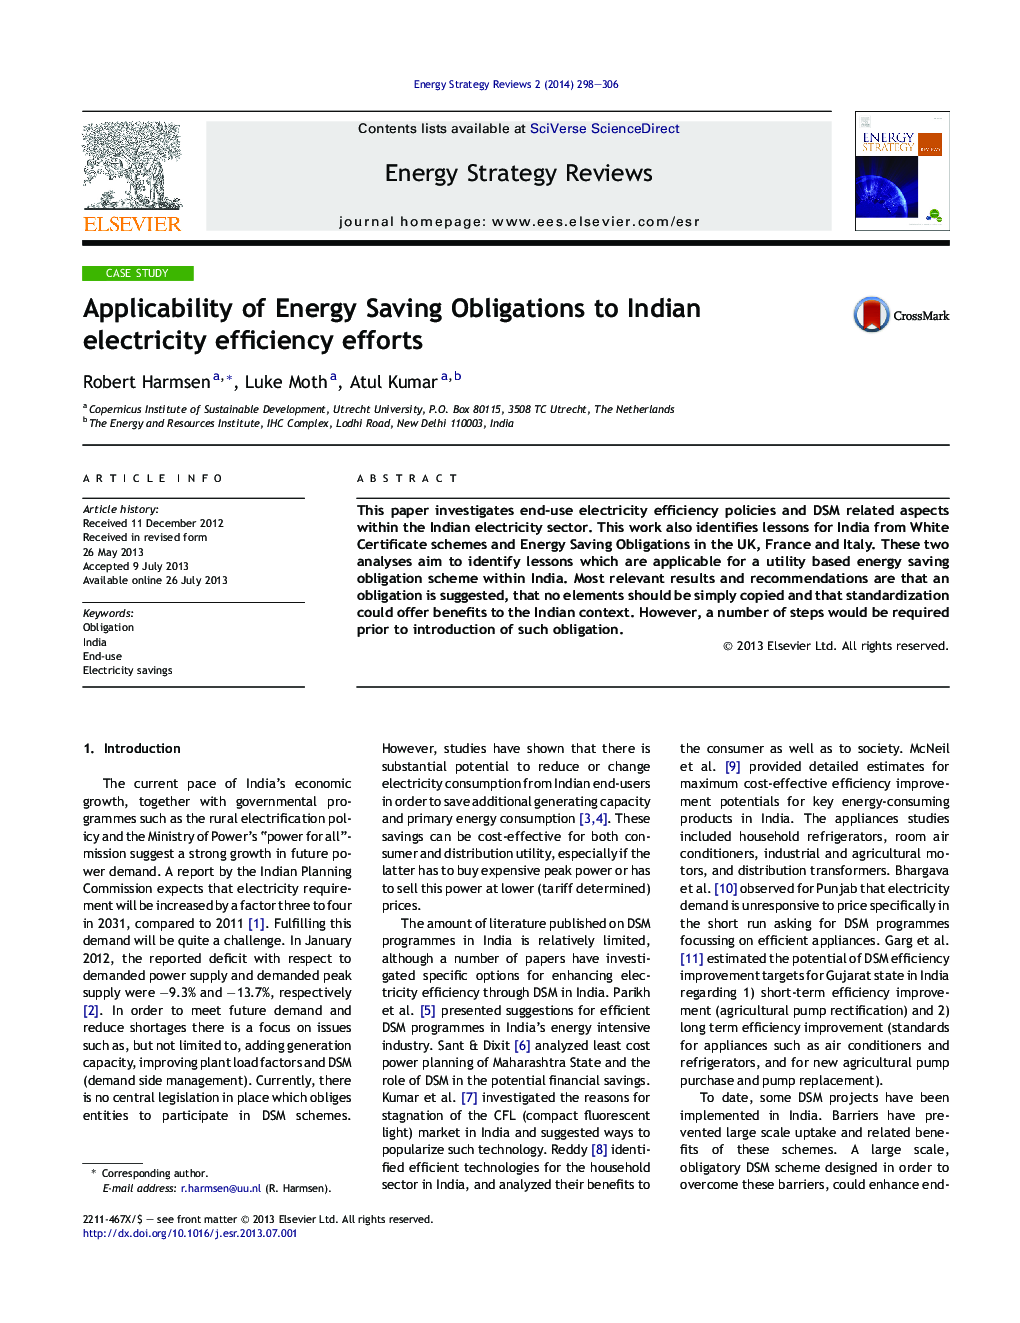 Applicability of Energy Saving Obligations to Indian electricity efficiency efforts